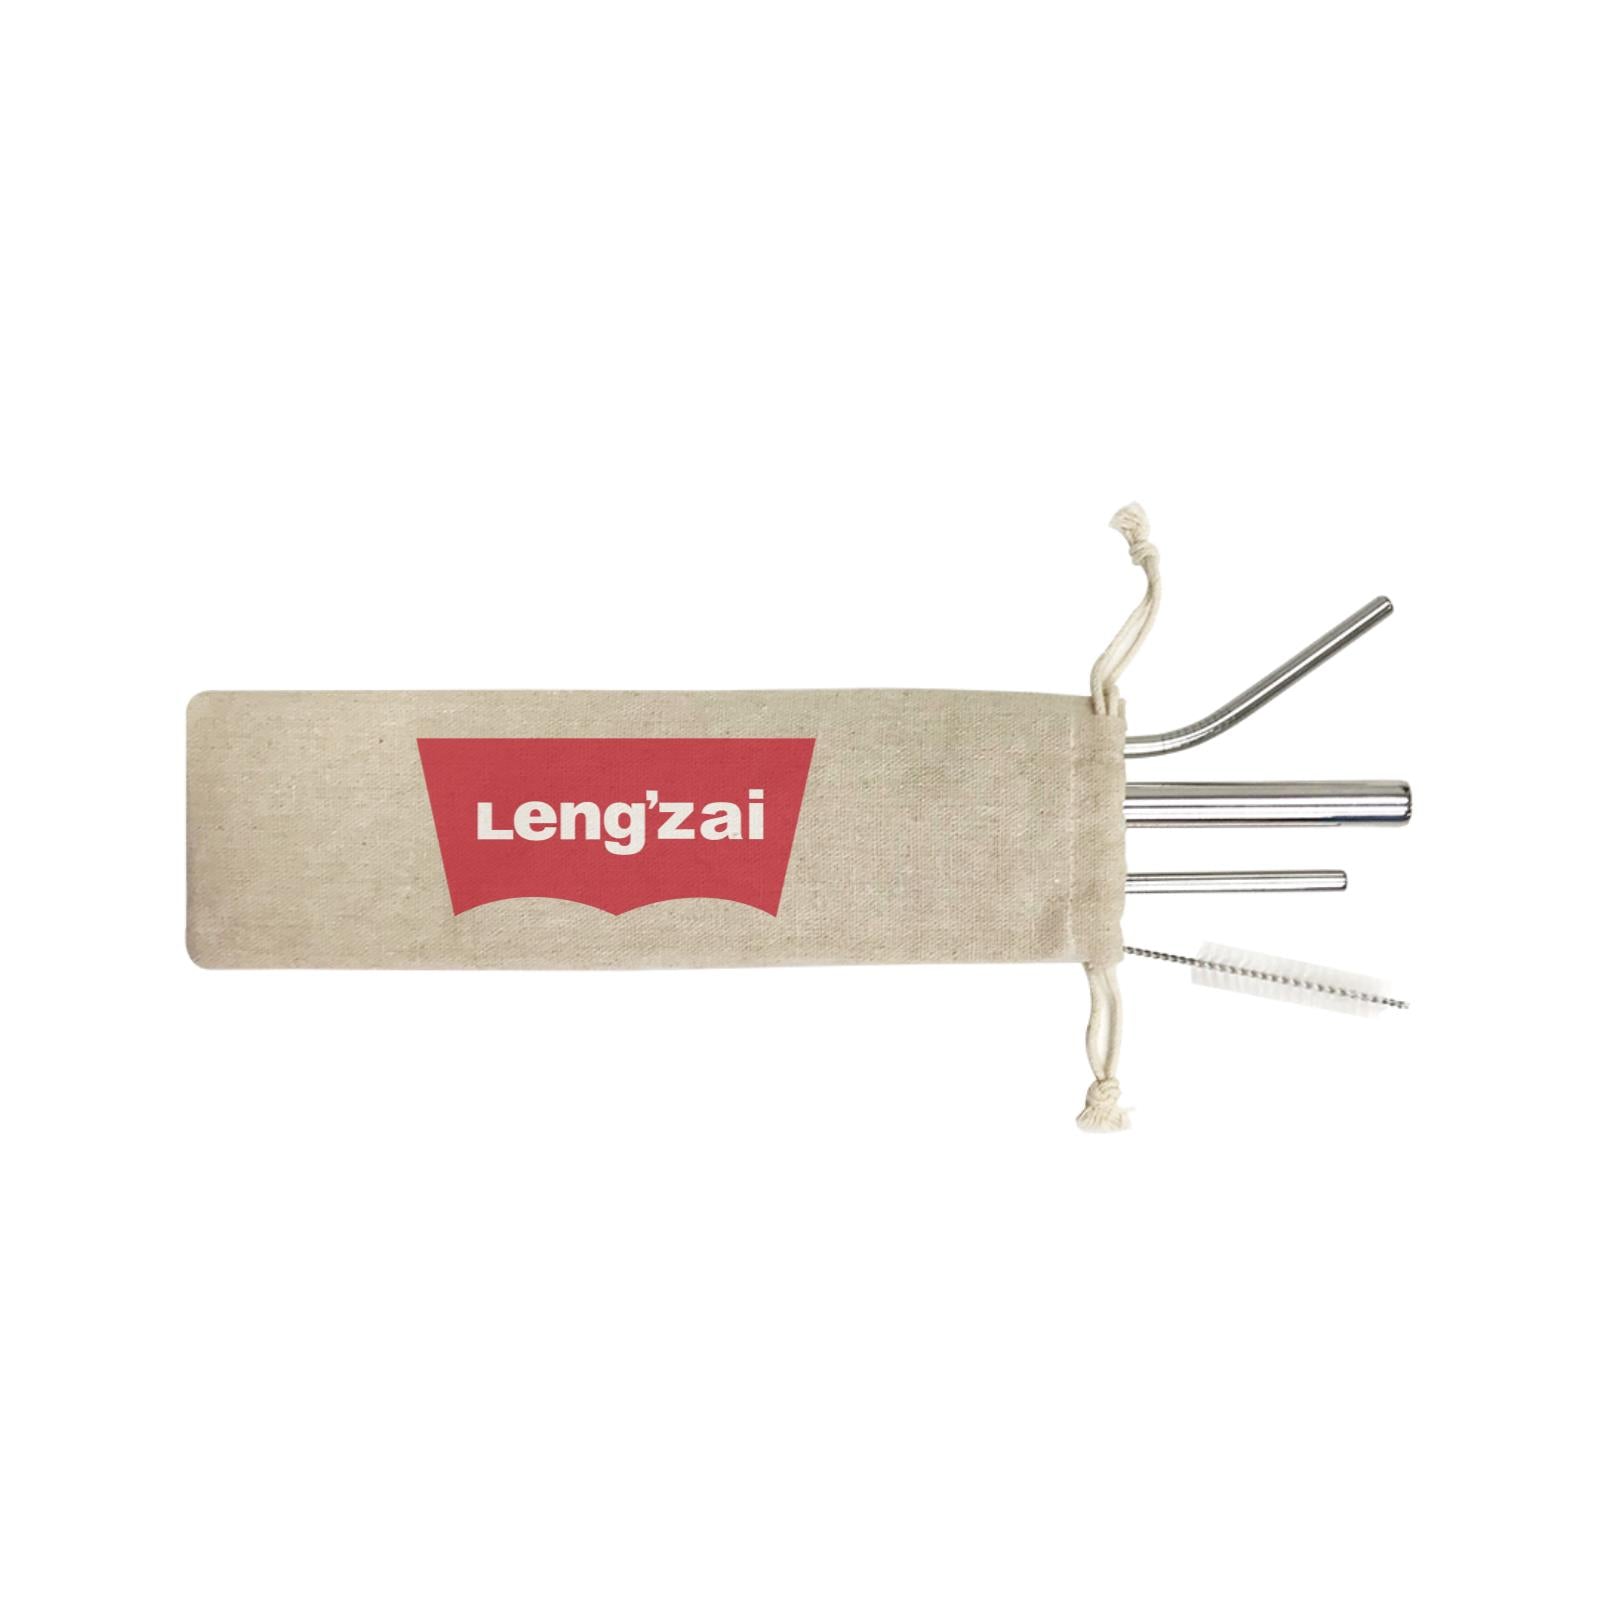 Slang Statement Lengzai 4-in-1 Stainless Steel Straw Set In a Satchel